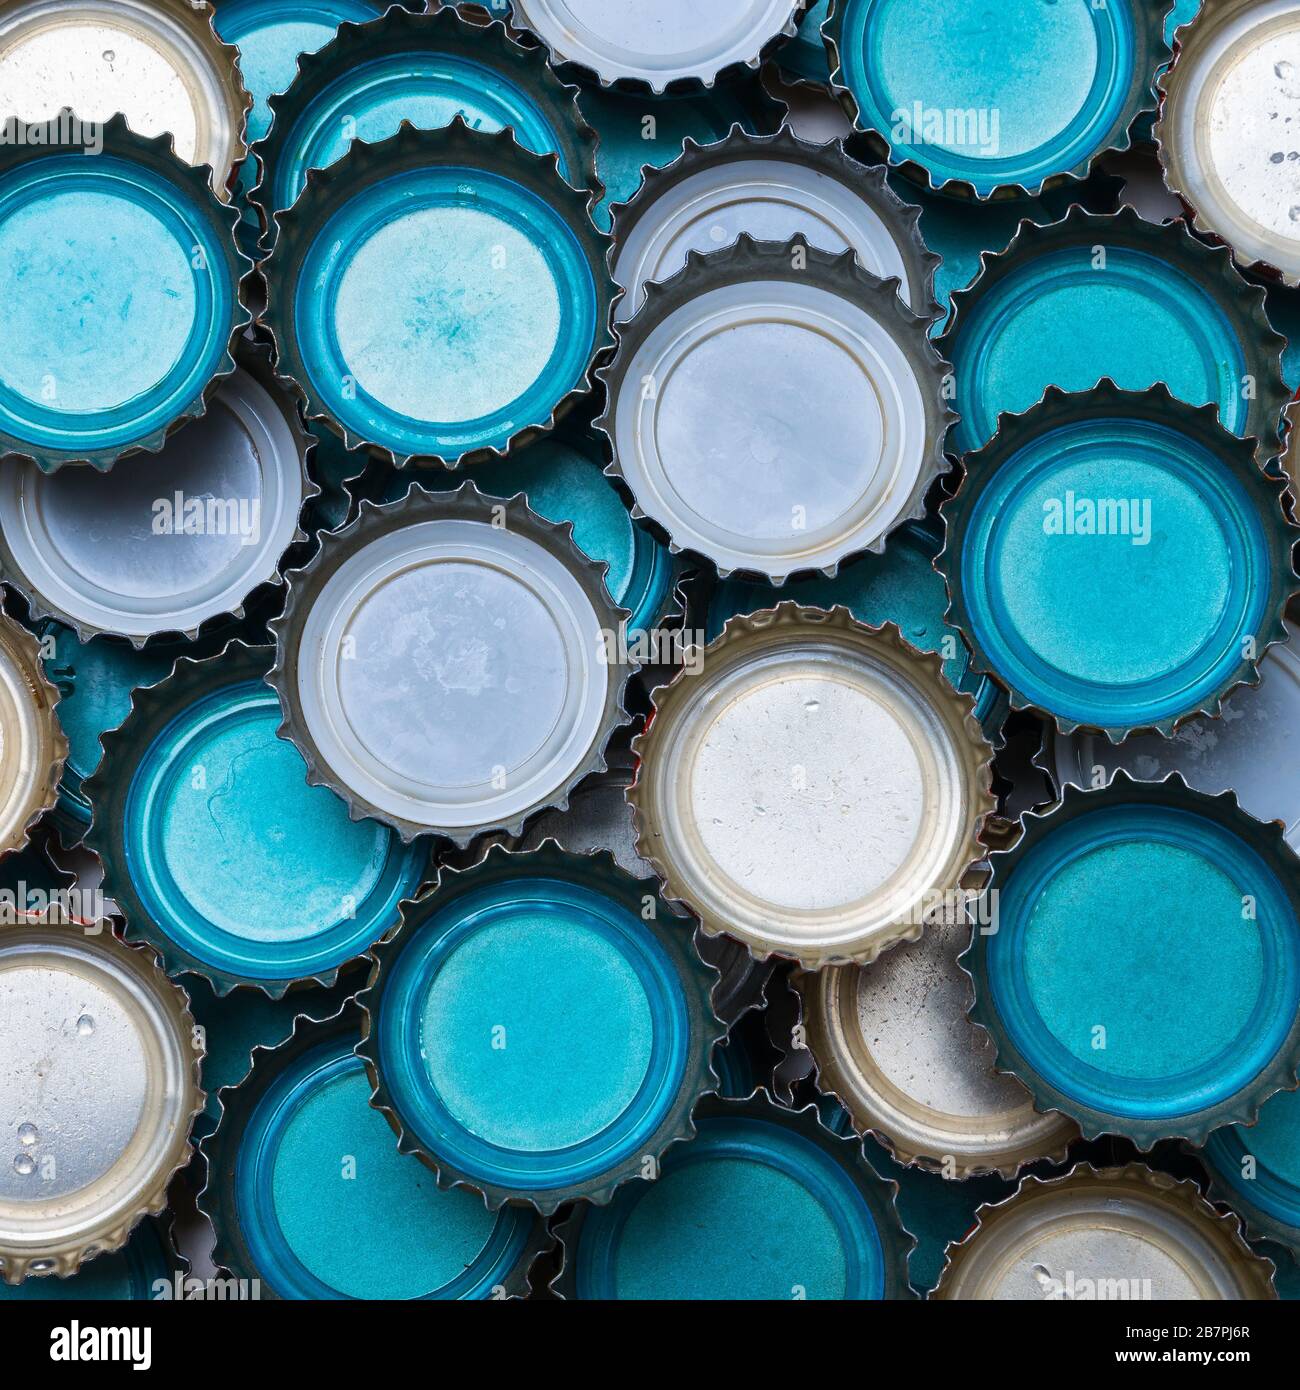 A pile of blue and white beer caps Stock Photo